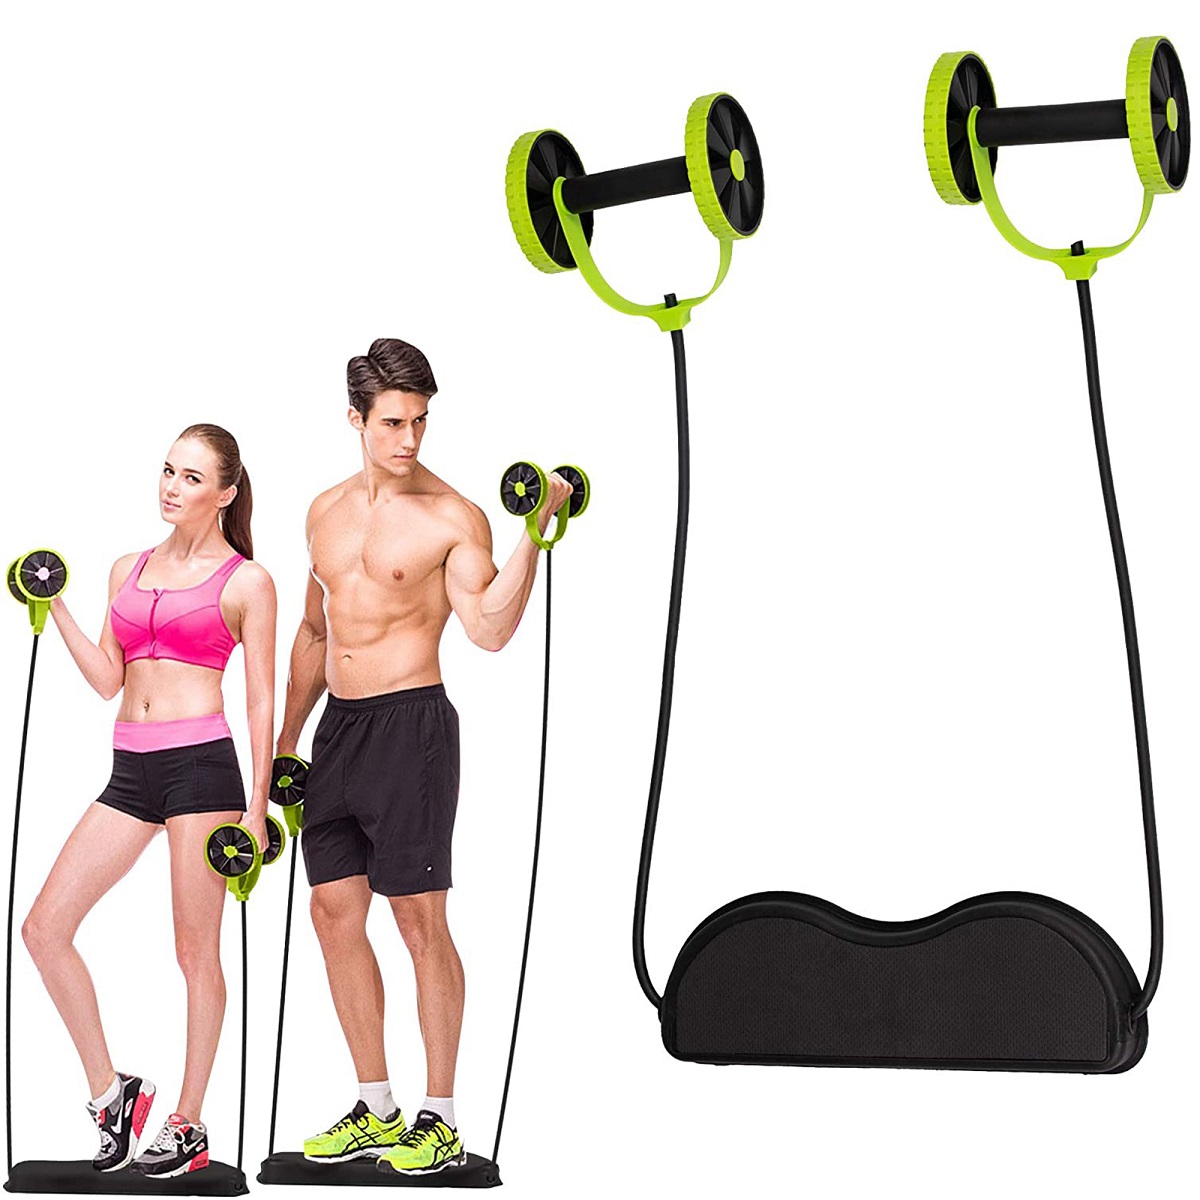 Dual ABS Abdominal Waist Roller Wheel Gym Exerciser Fitness Workout Exercise 